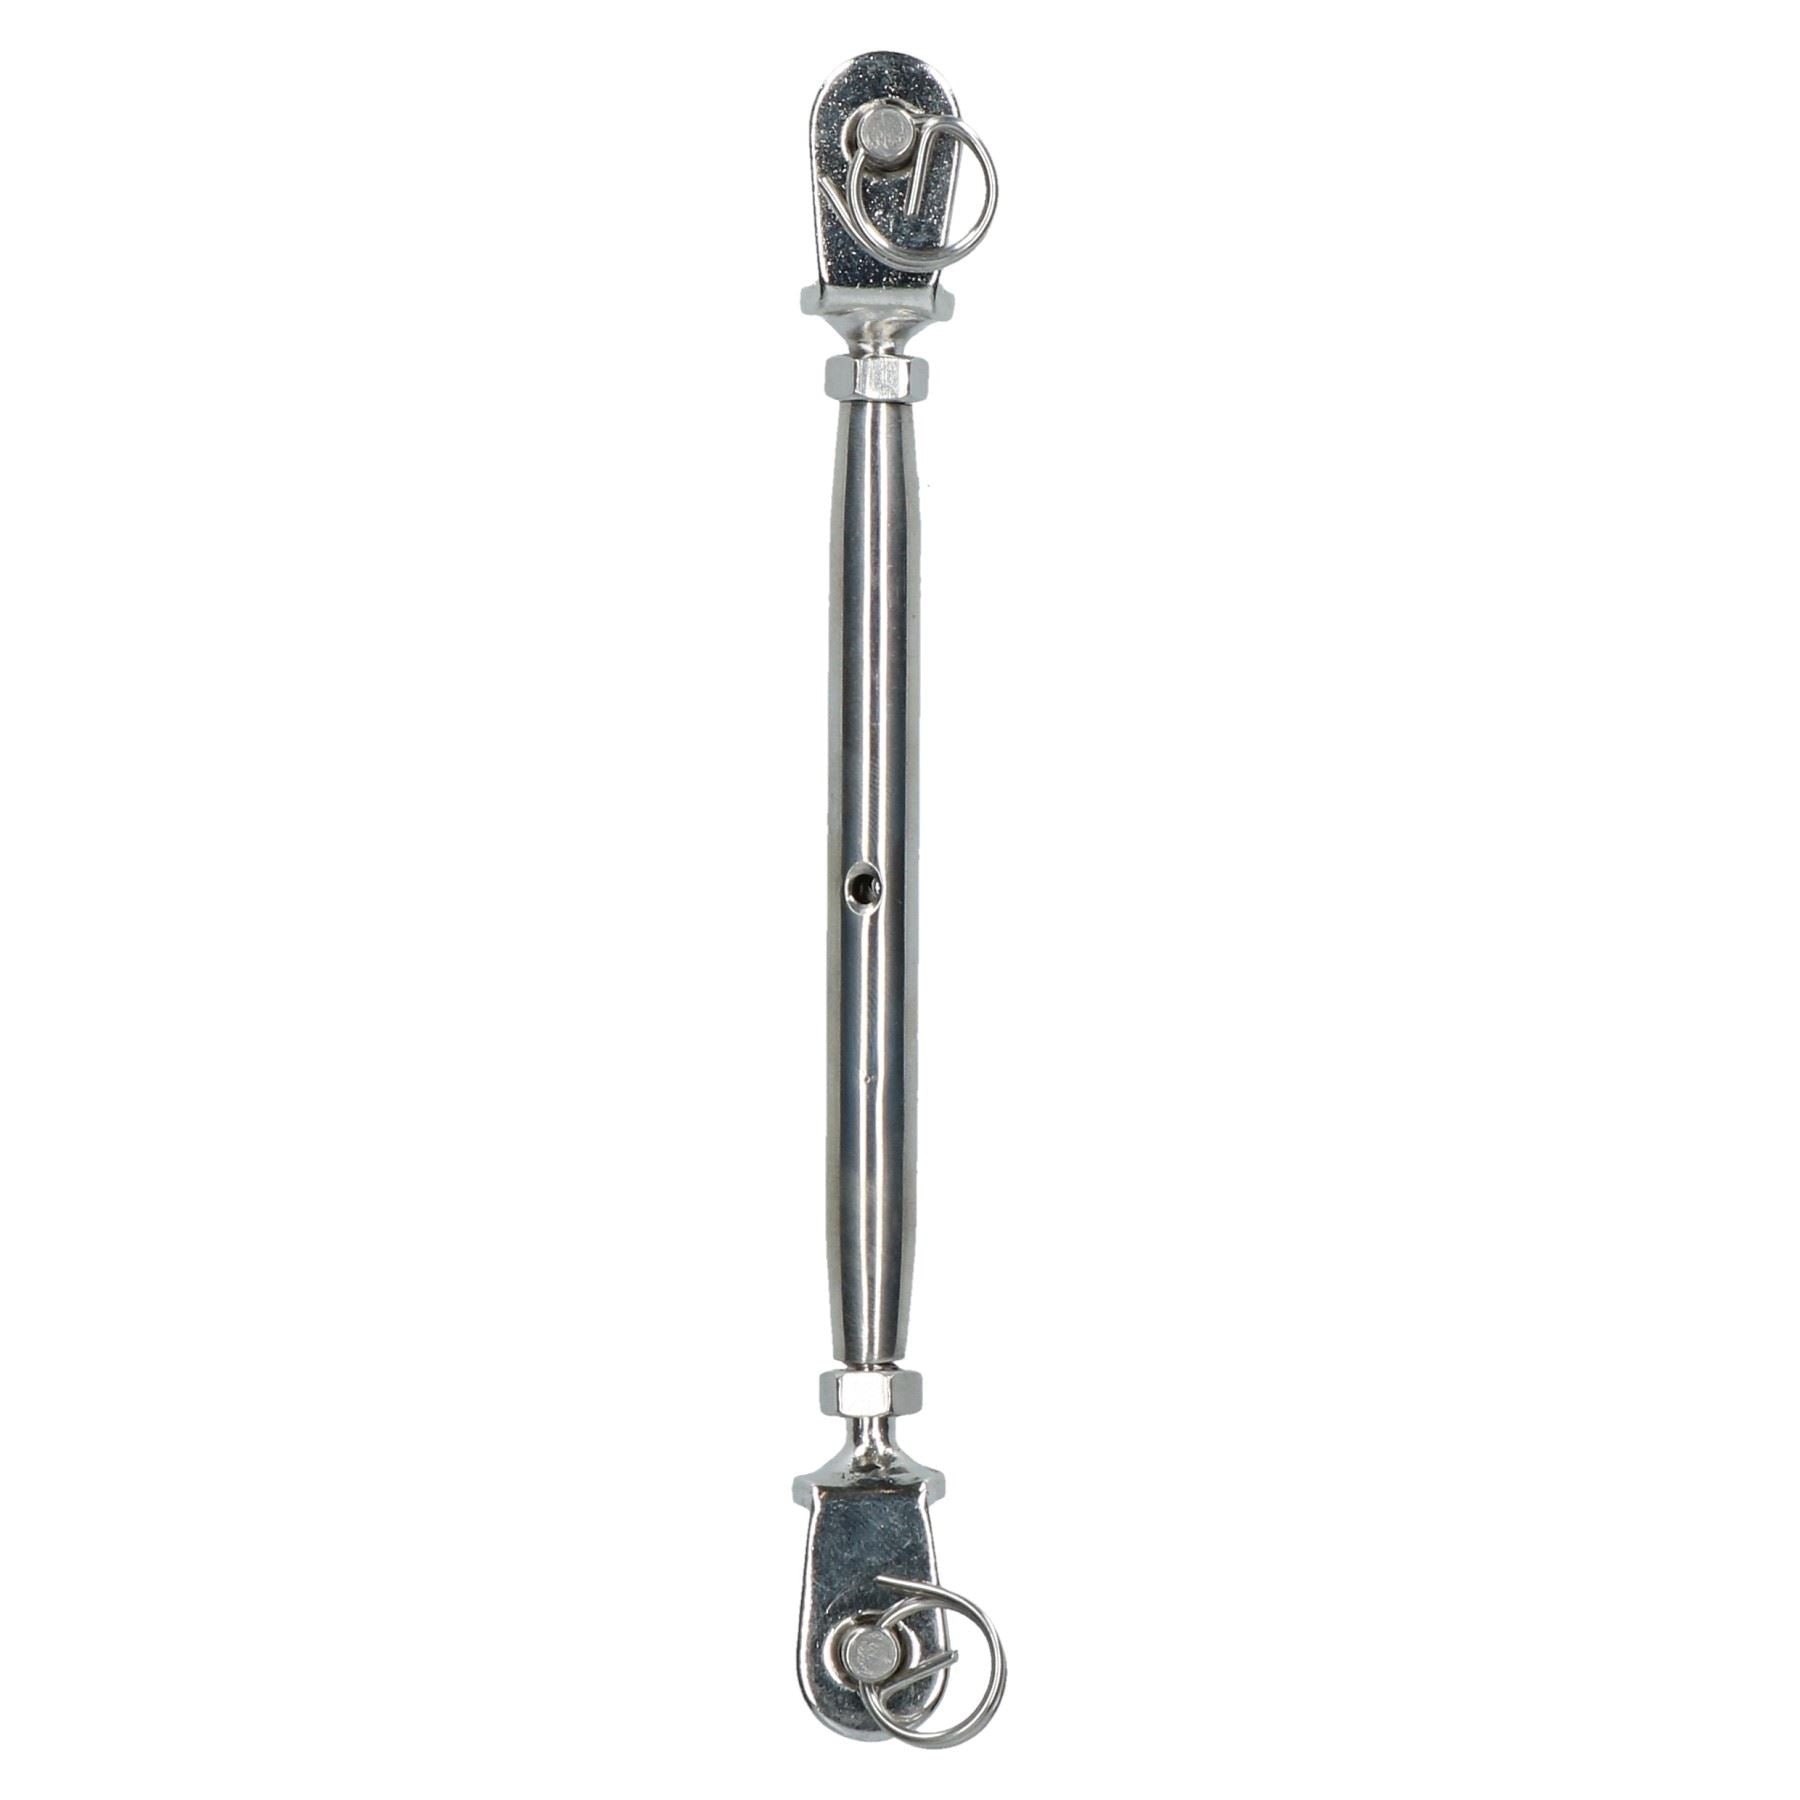 Rigging Screw 5mm Jaw to Jaw Turnbuckle Straining Marine Grade 316 Stainless